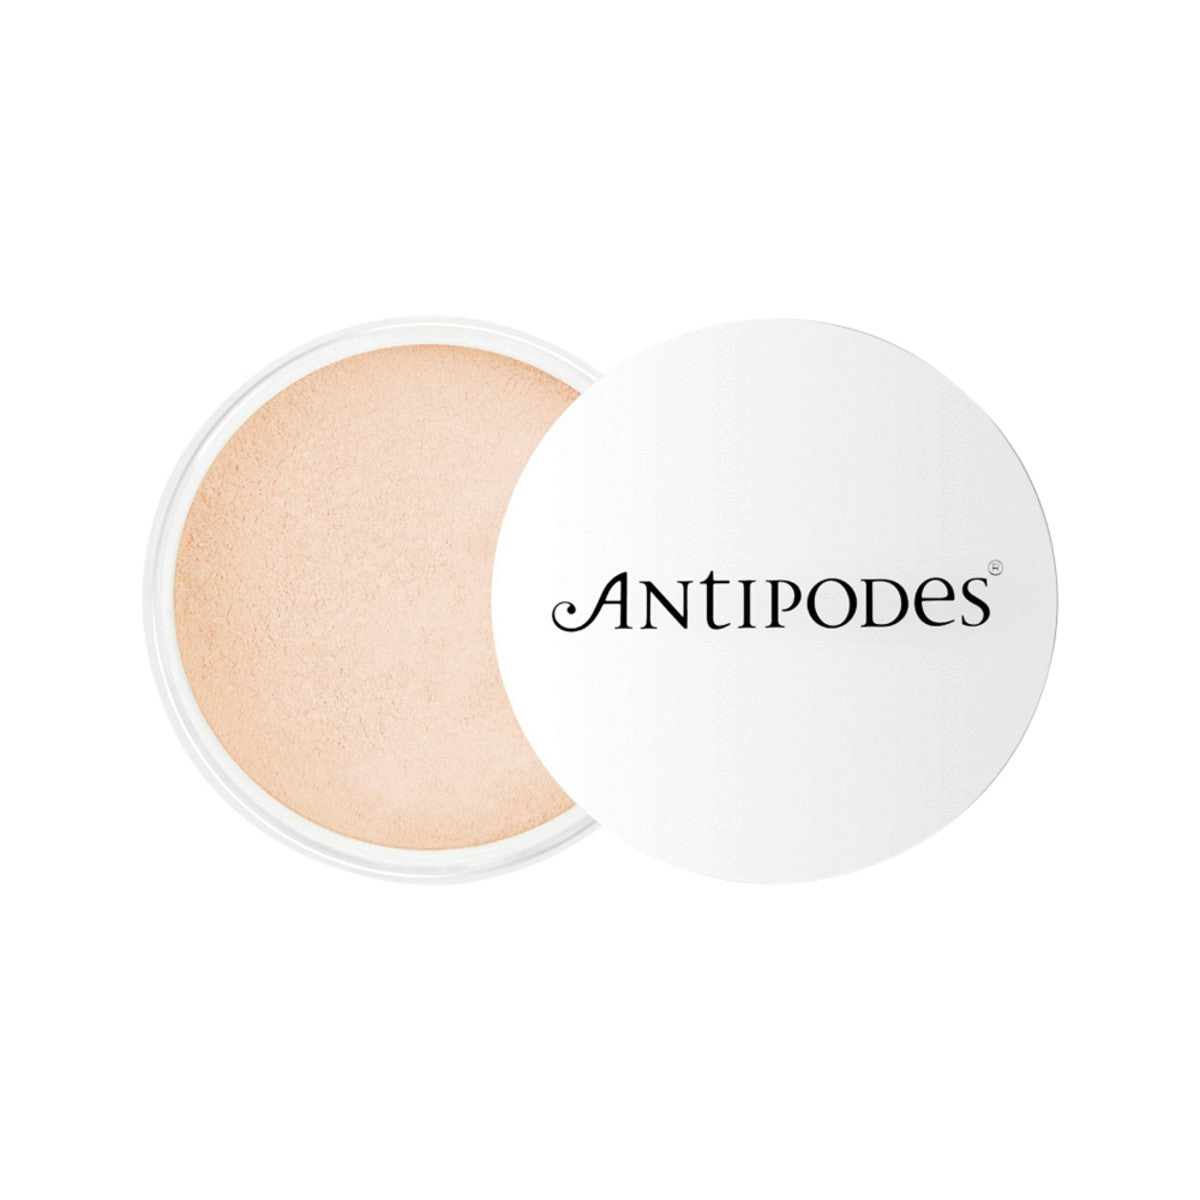 image of Antipodes Performance Plus Mineral Foundation with SPF 15 Ivory 11g on white background 